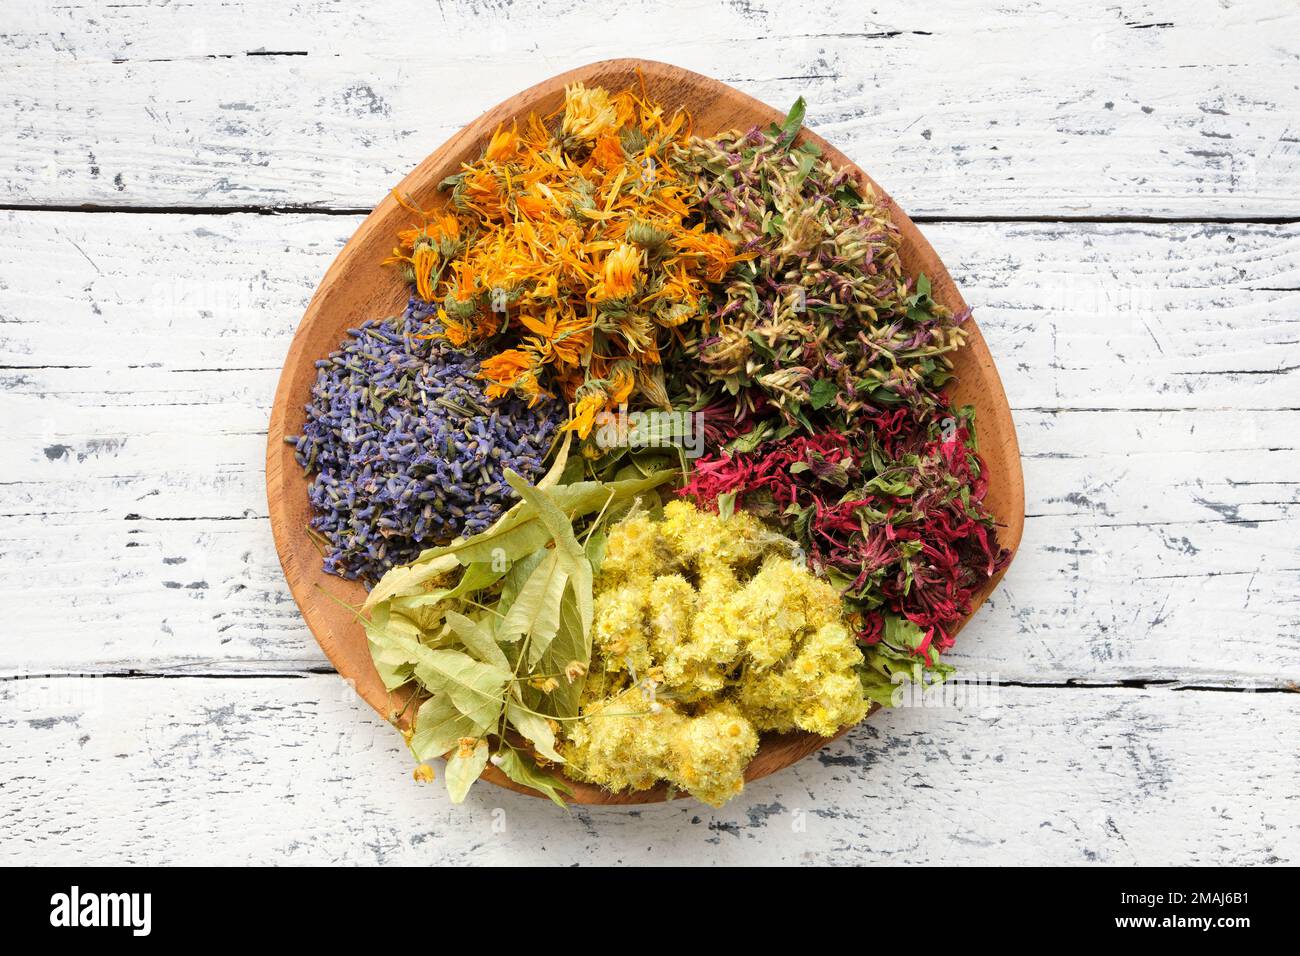 Wooden plate of medicinal herbs - lavender, calendula, red clover, helichrysum, lime tree flowers - ingredients for making of herbal medicine drugs, t Stock Photo